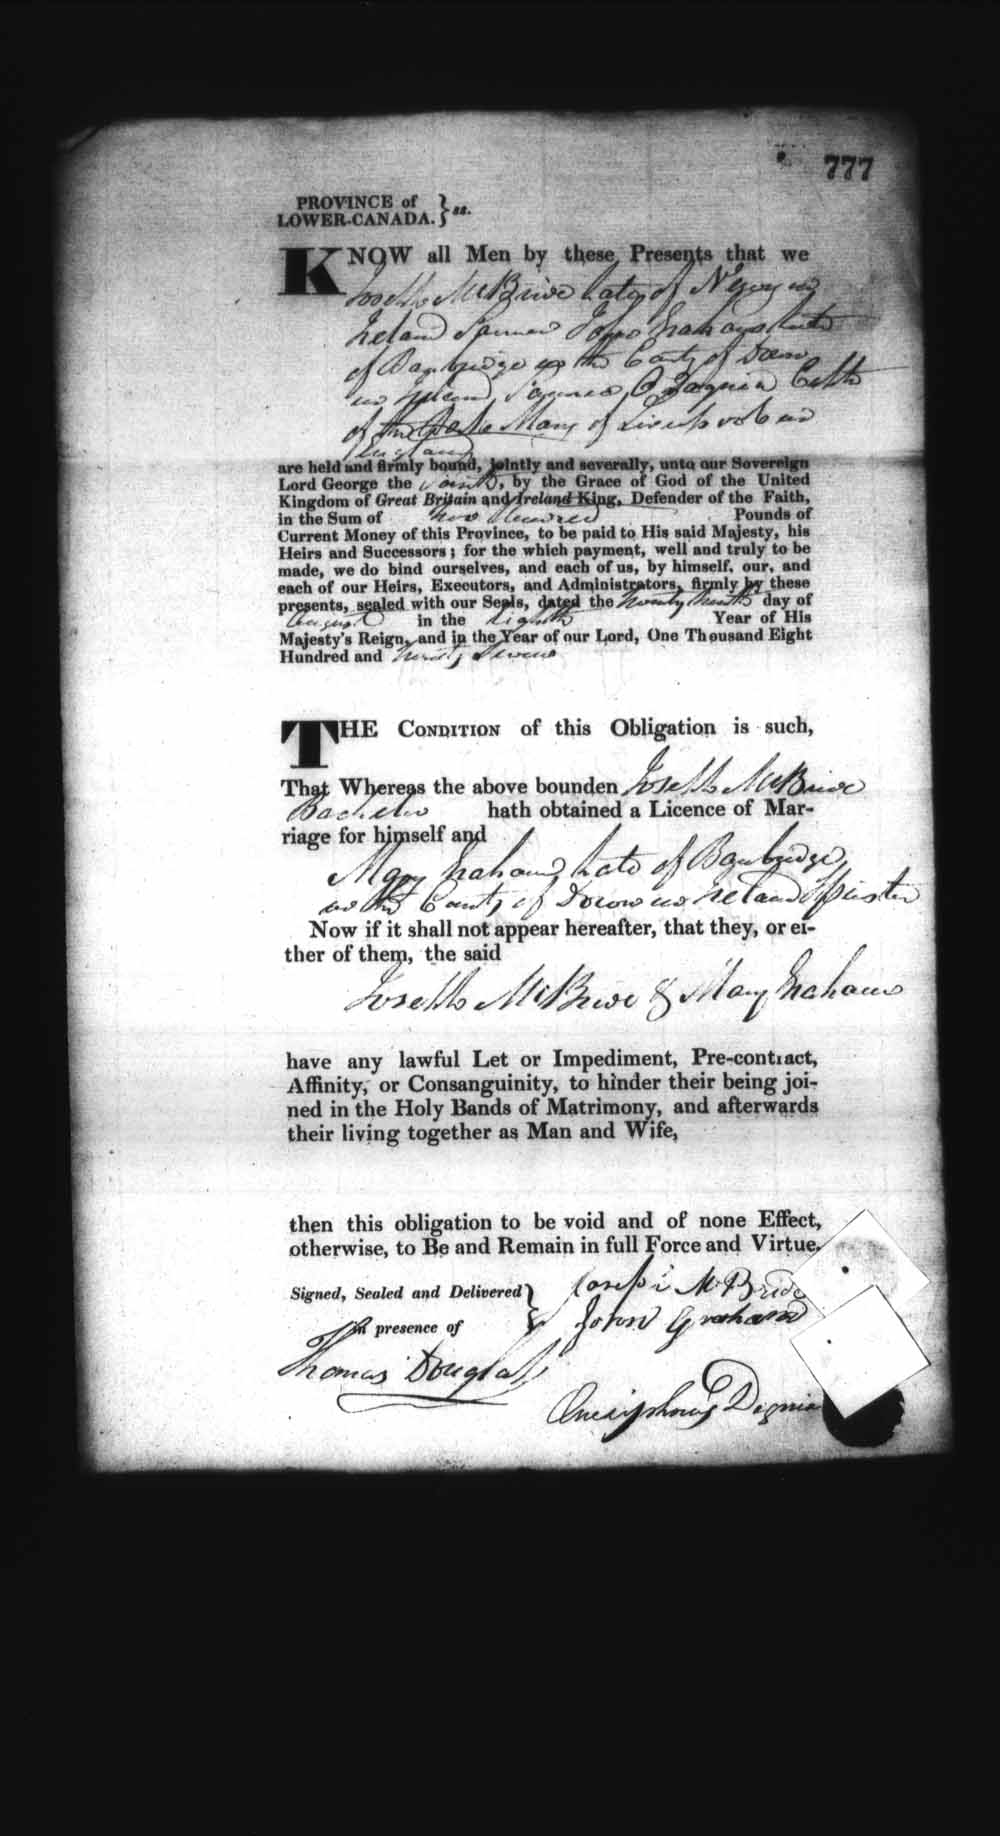 Digitized page of Upper and Lower Canada Marriage Bonds (1779-1865) for Image No.: e008236850